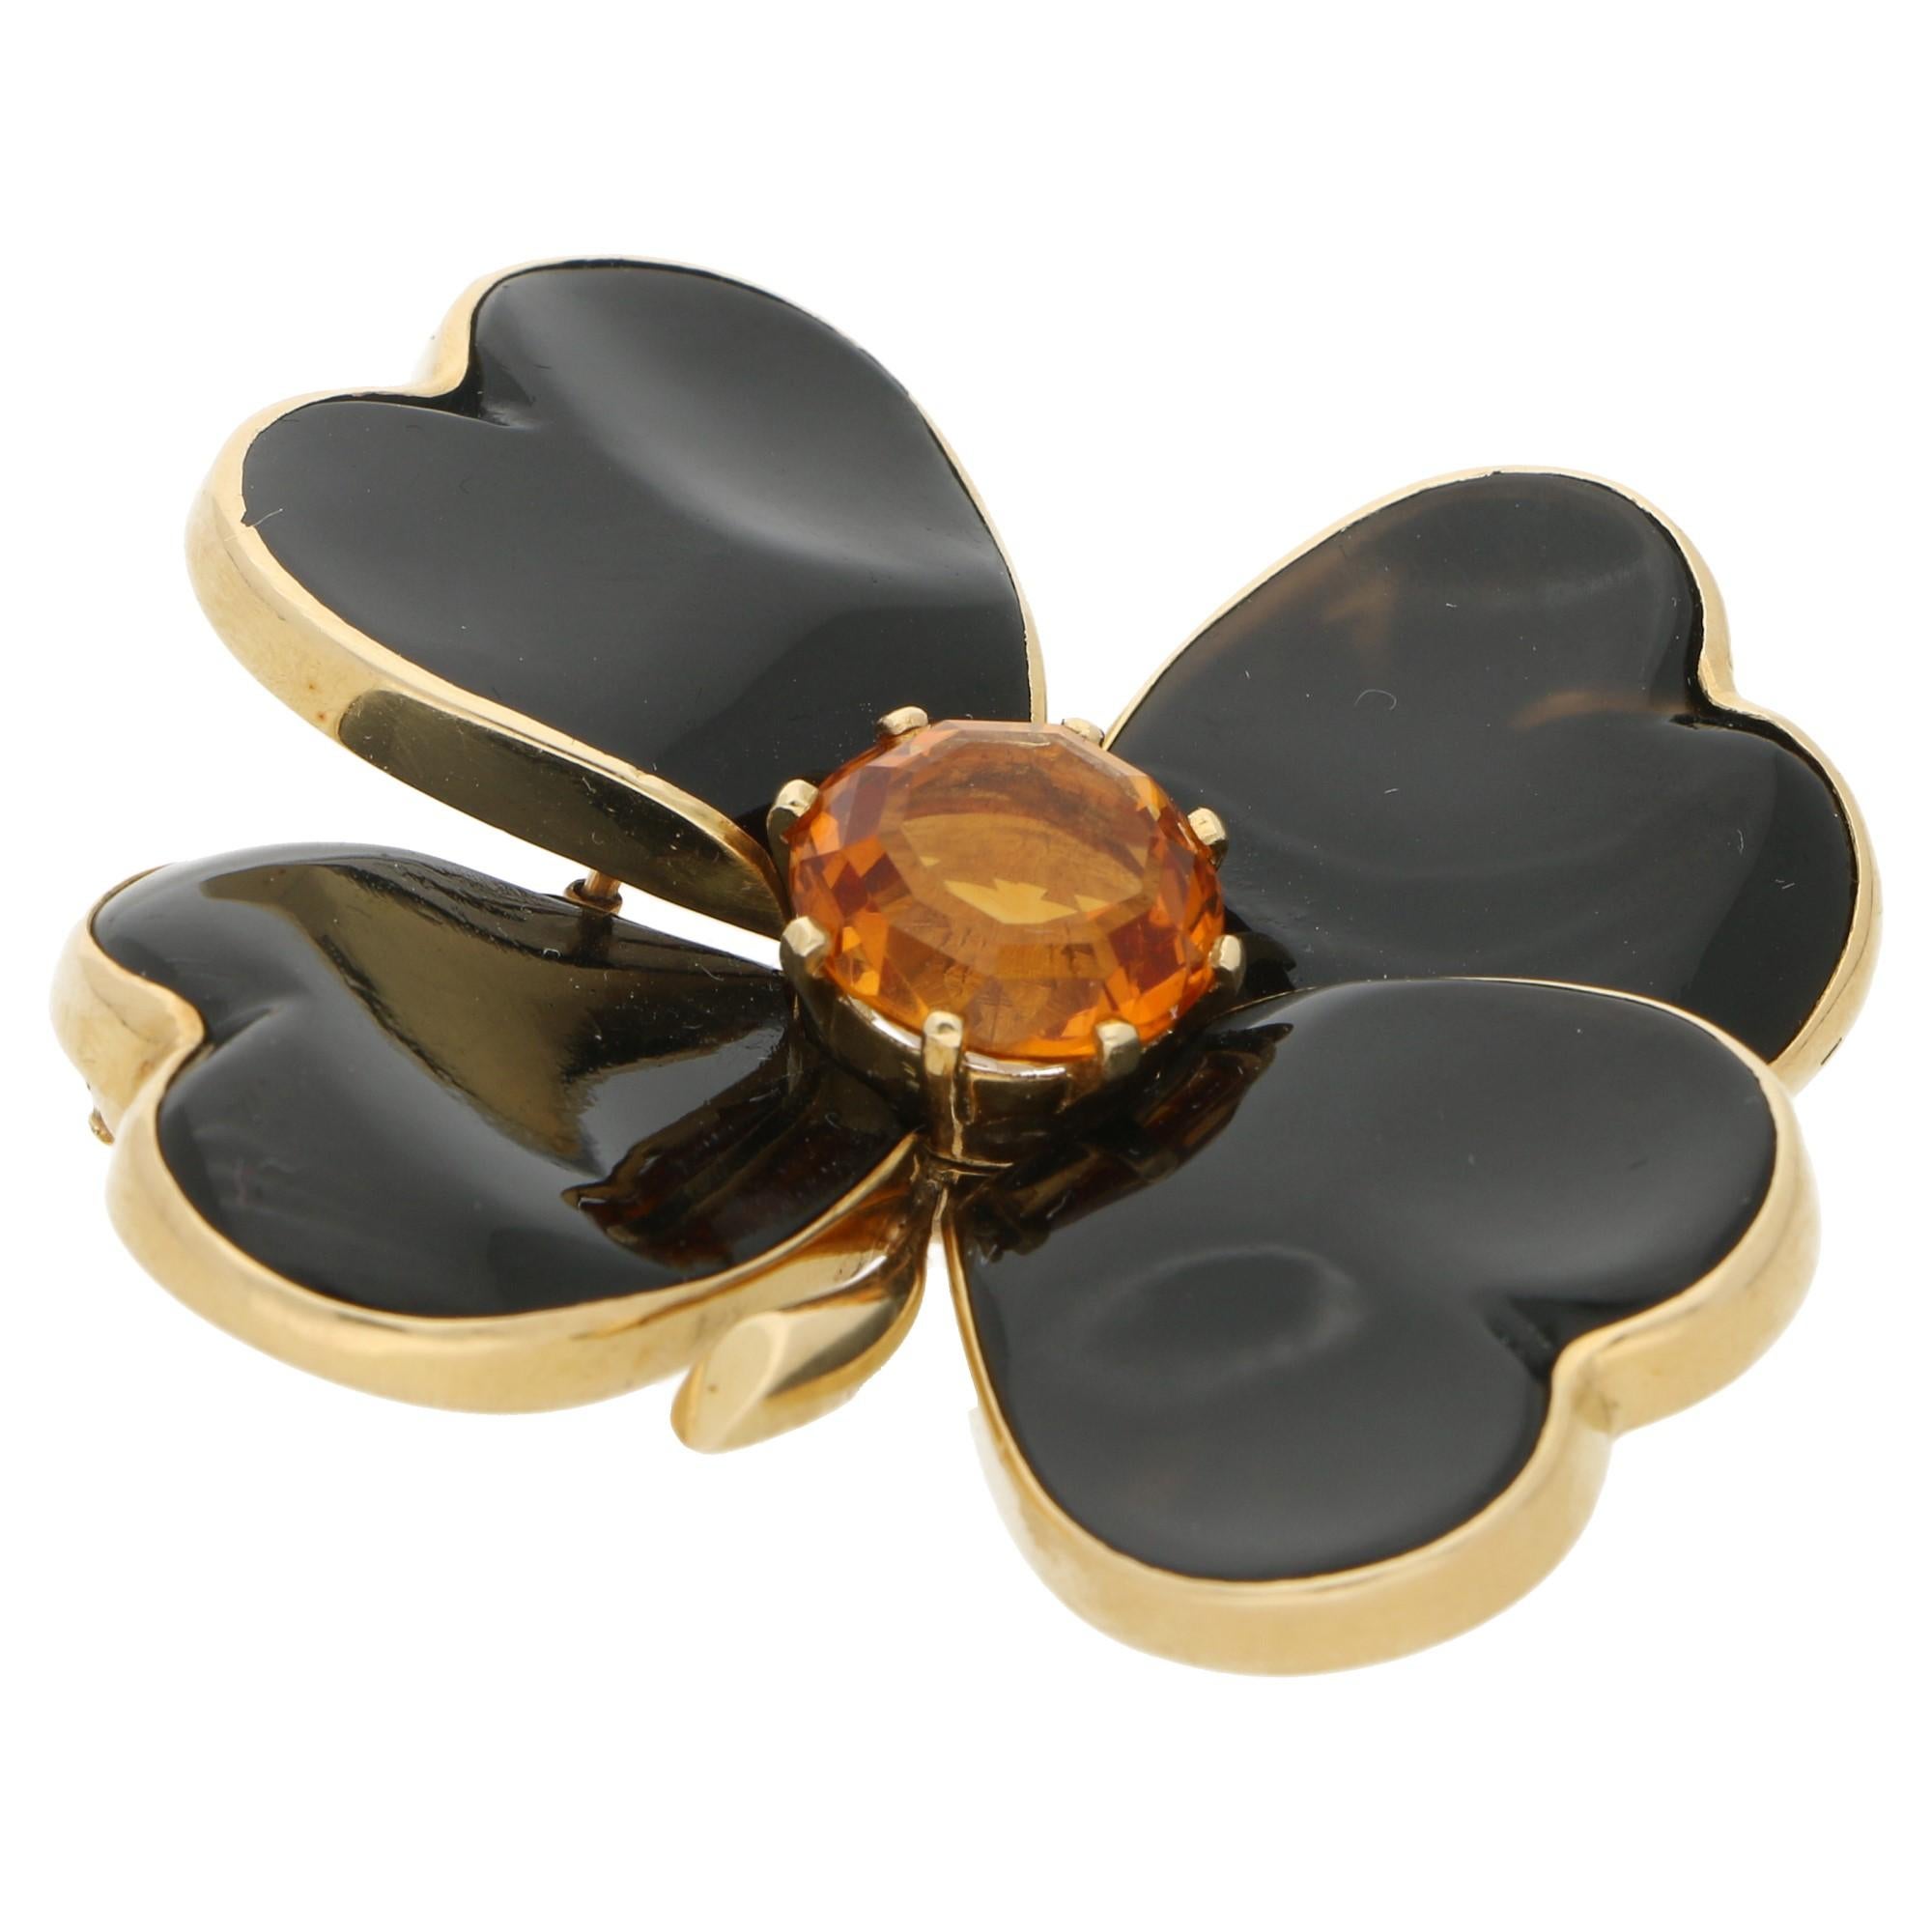 A striking onyx and citrine floral brooch. 
The brooch is formed of heart shaped petal motifs set with black onyx which in 18ct yellow gold. 
The brooch is further embellished with an eight claw-set round cut citrine at the centre and secured to the